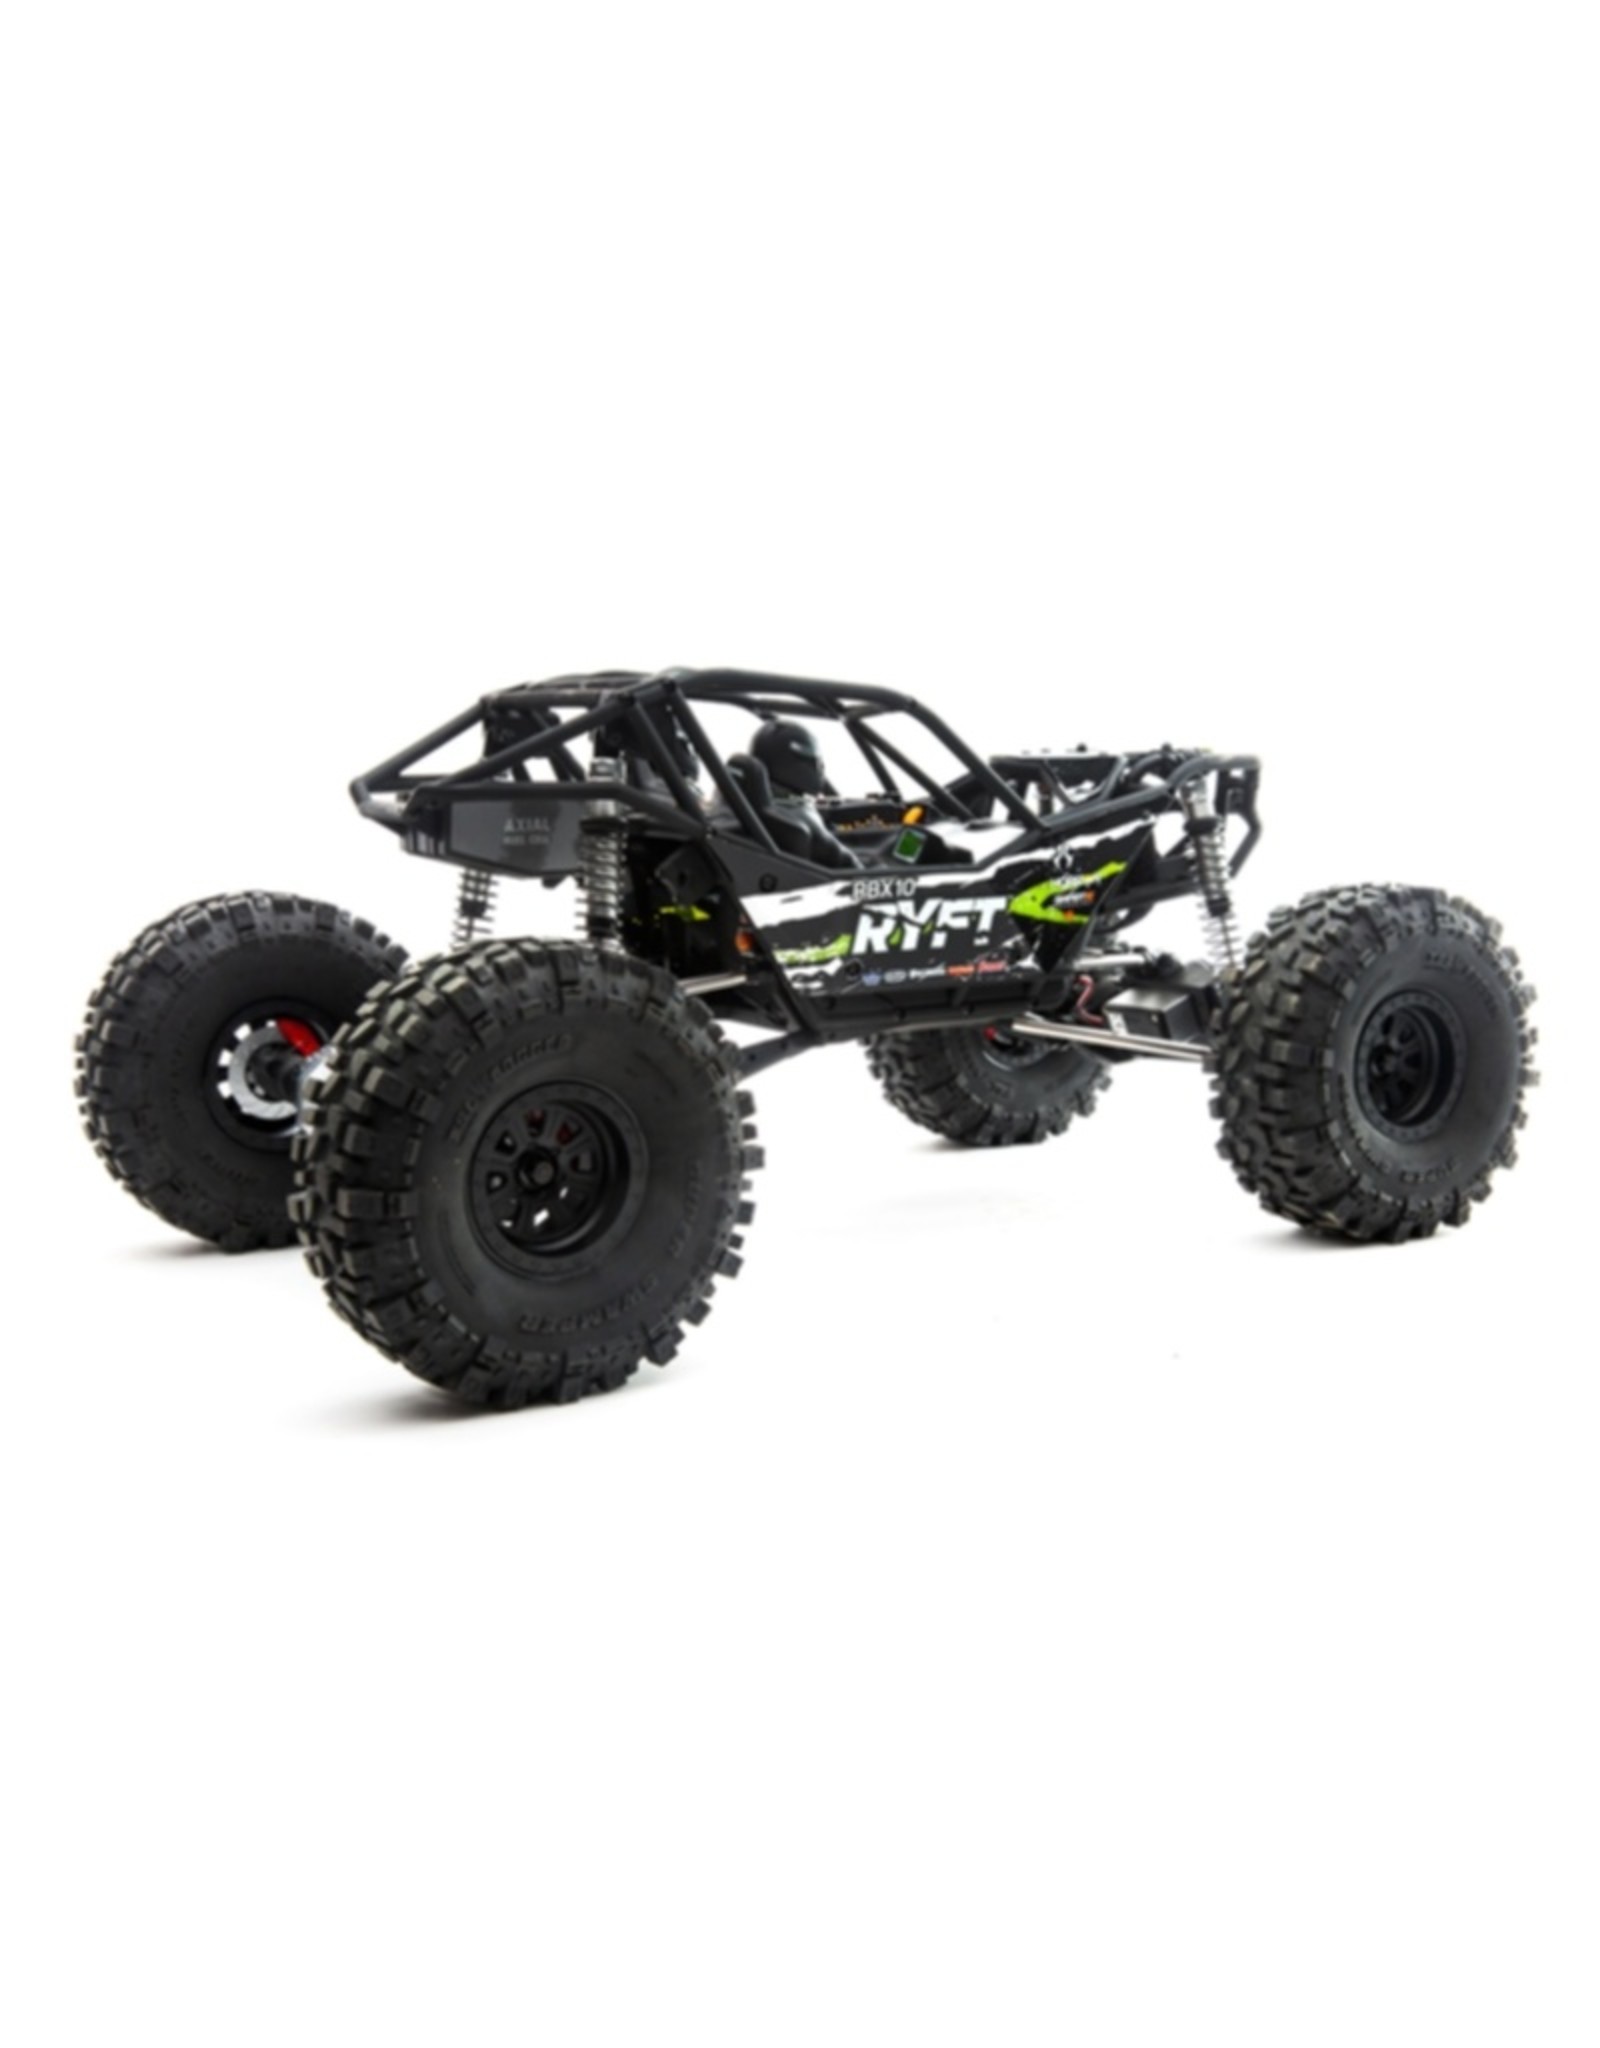 Axial AXI03005T2 RBX10 Ryft 1/10th 4wd RTR Black